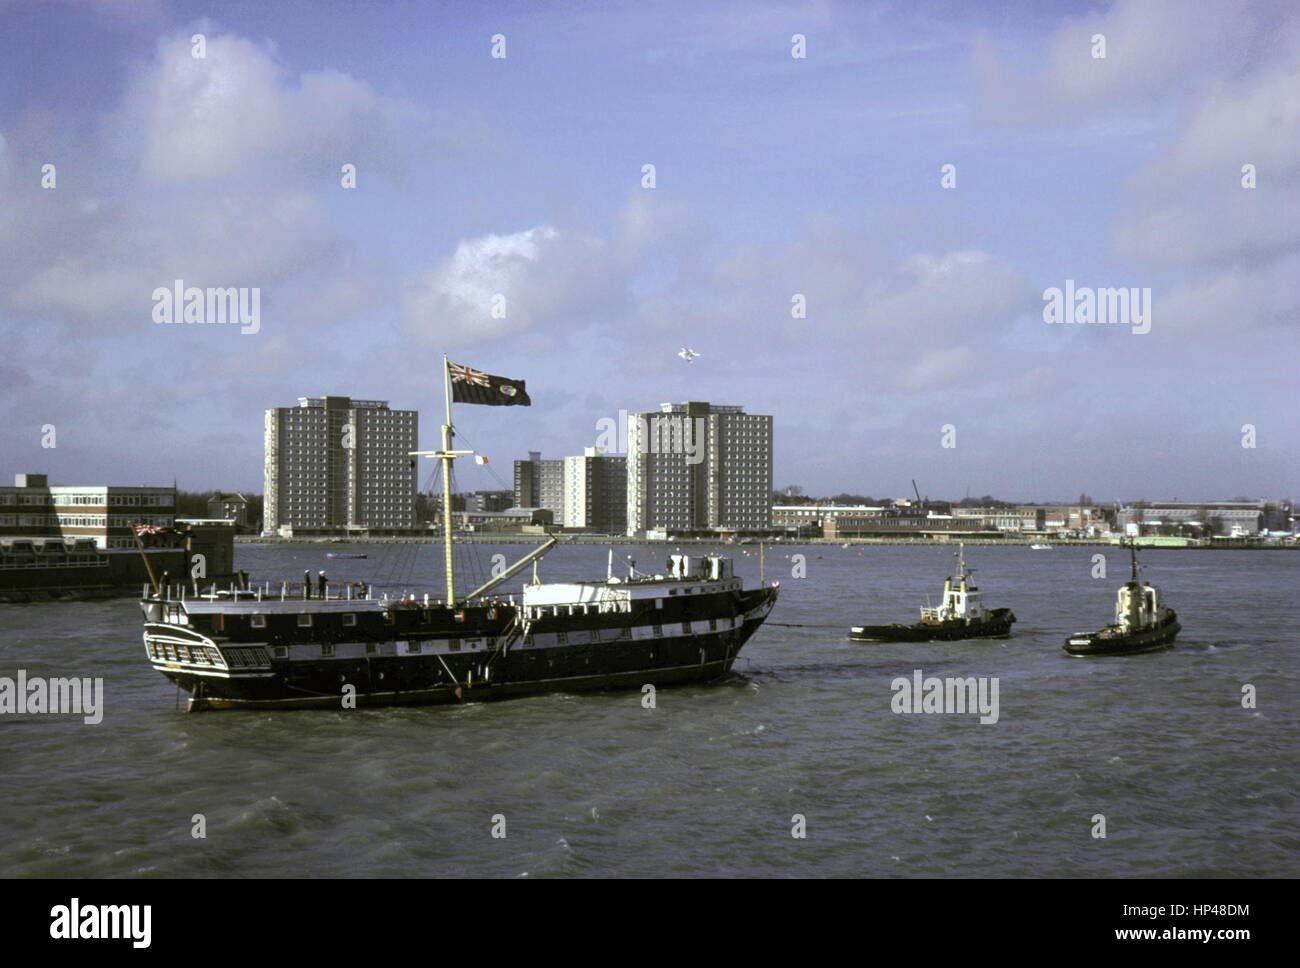 AJAXNETPHOTO. 21ST JANUARY, 1977. PORTSMOUTH, ENGLAND. - WOODEN WALL RETURNS -  T.S. FOUDROYANT (EX TRINCOMALEE) UNDER TOW ENTERING HARBOUR AFTER RECENT REFIT.  PHOTO:JONATHAN EASTLAND/AJAX  REF:2772101 4777 Stock Photo